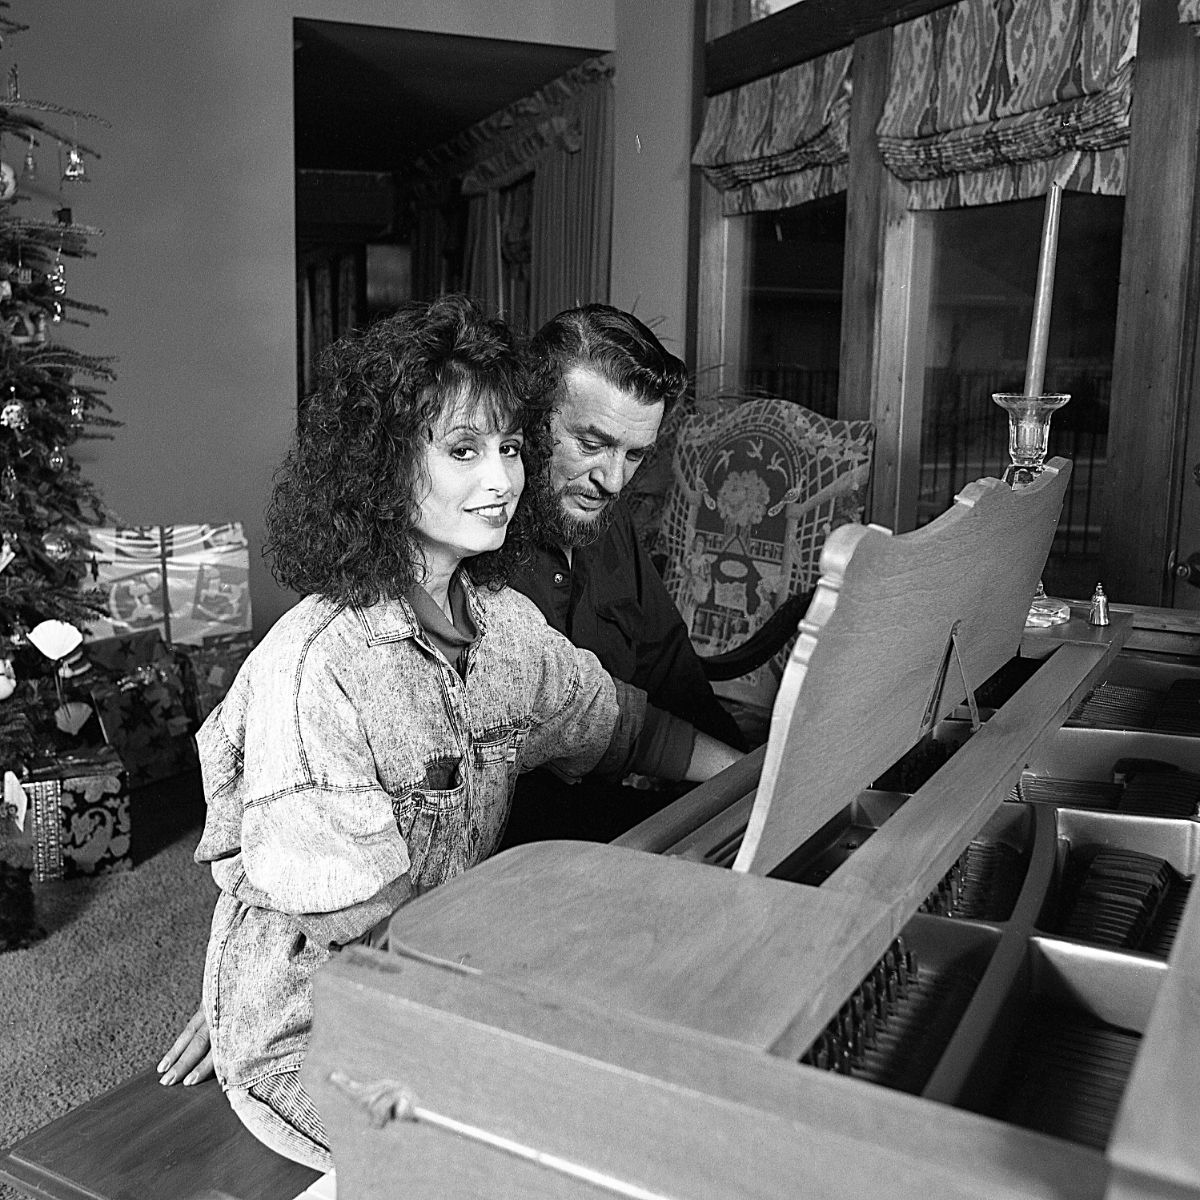 Waylon Jennings and second wife Jessi Colter